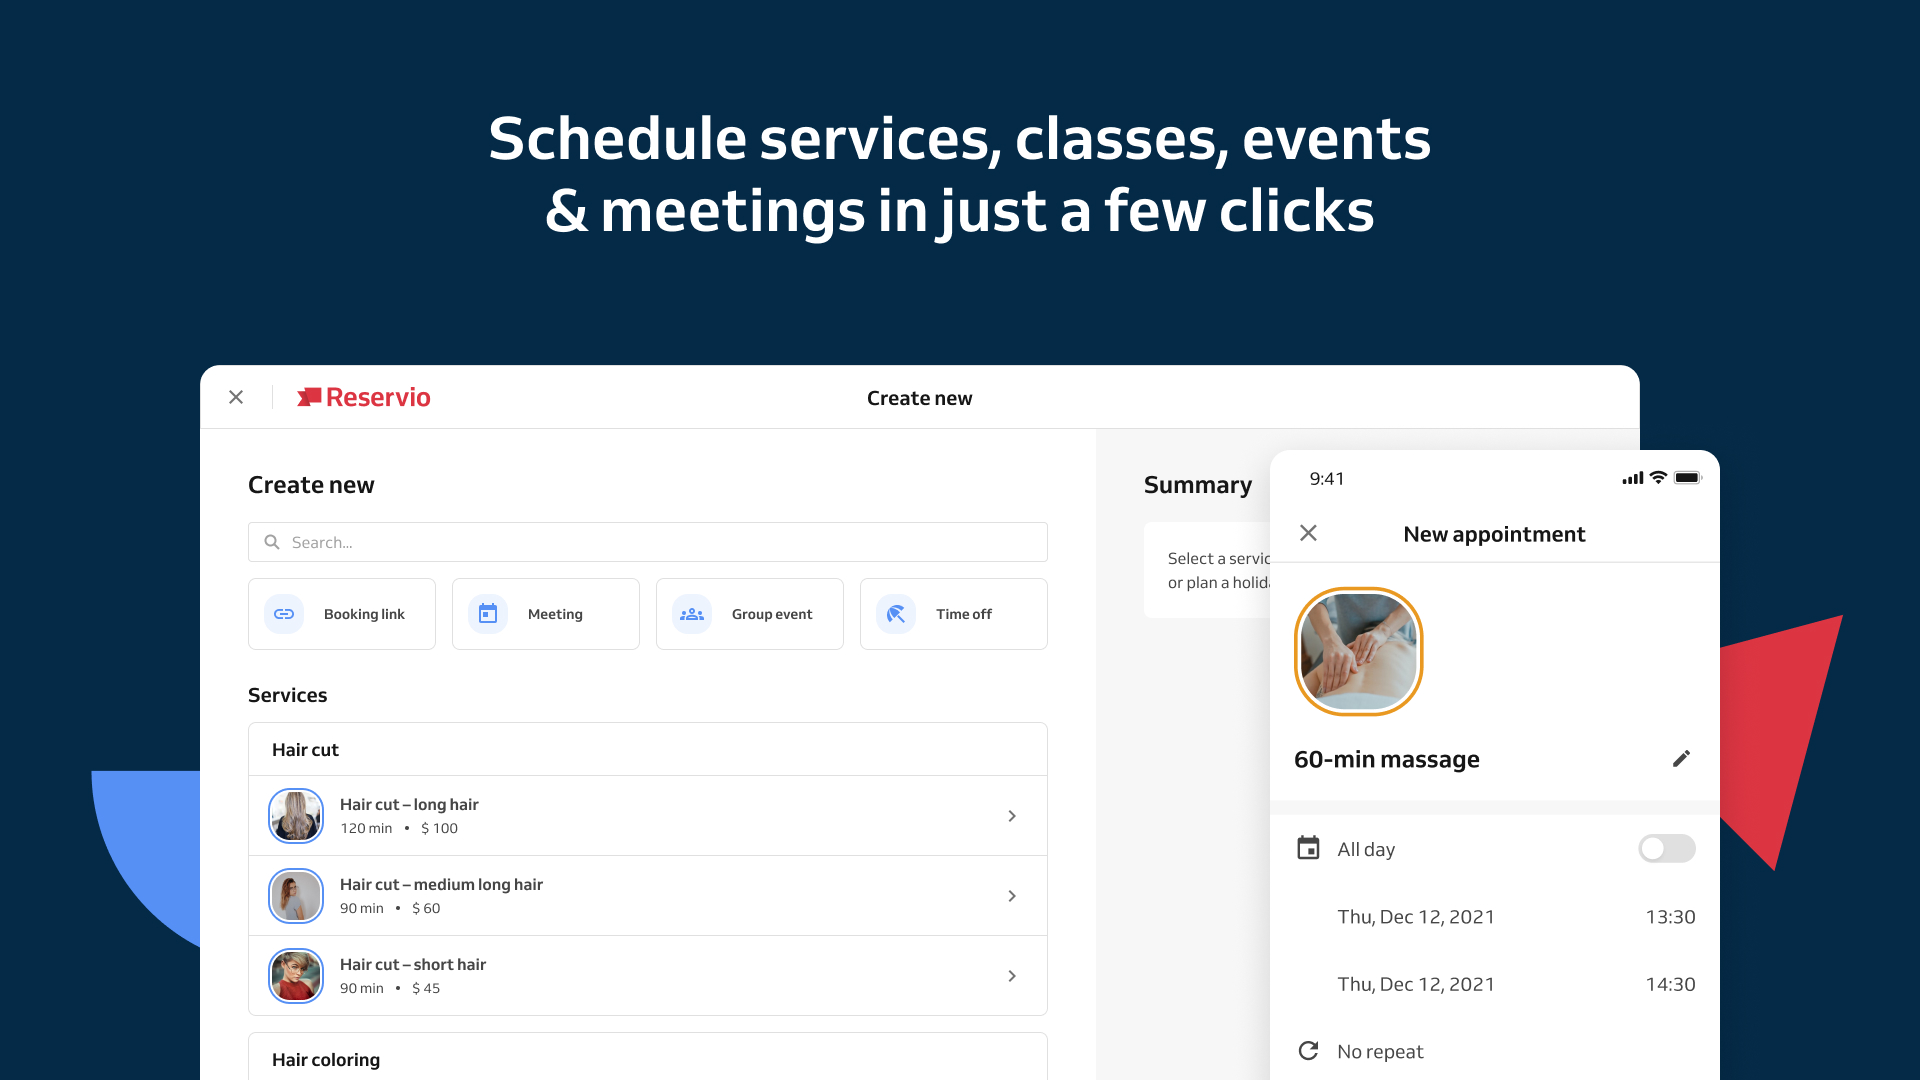 Schedule services, classes, events & meetings in just a few clicks